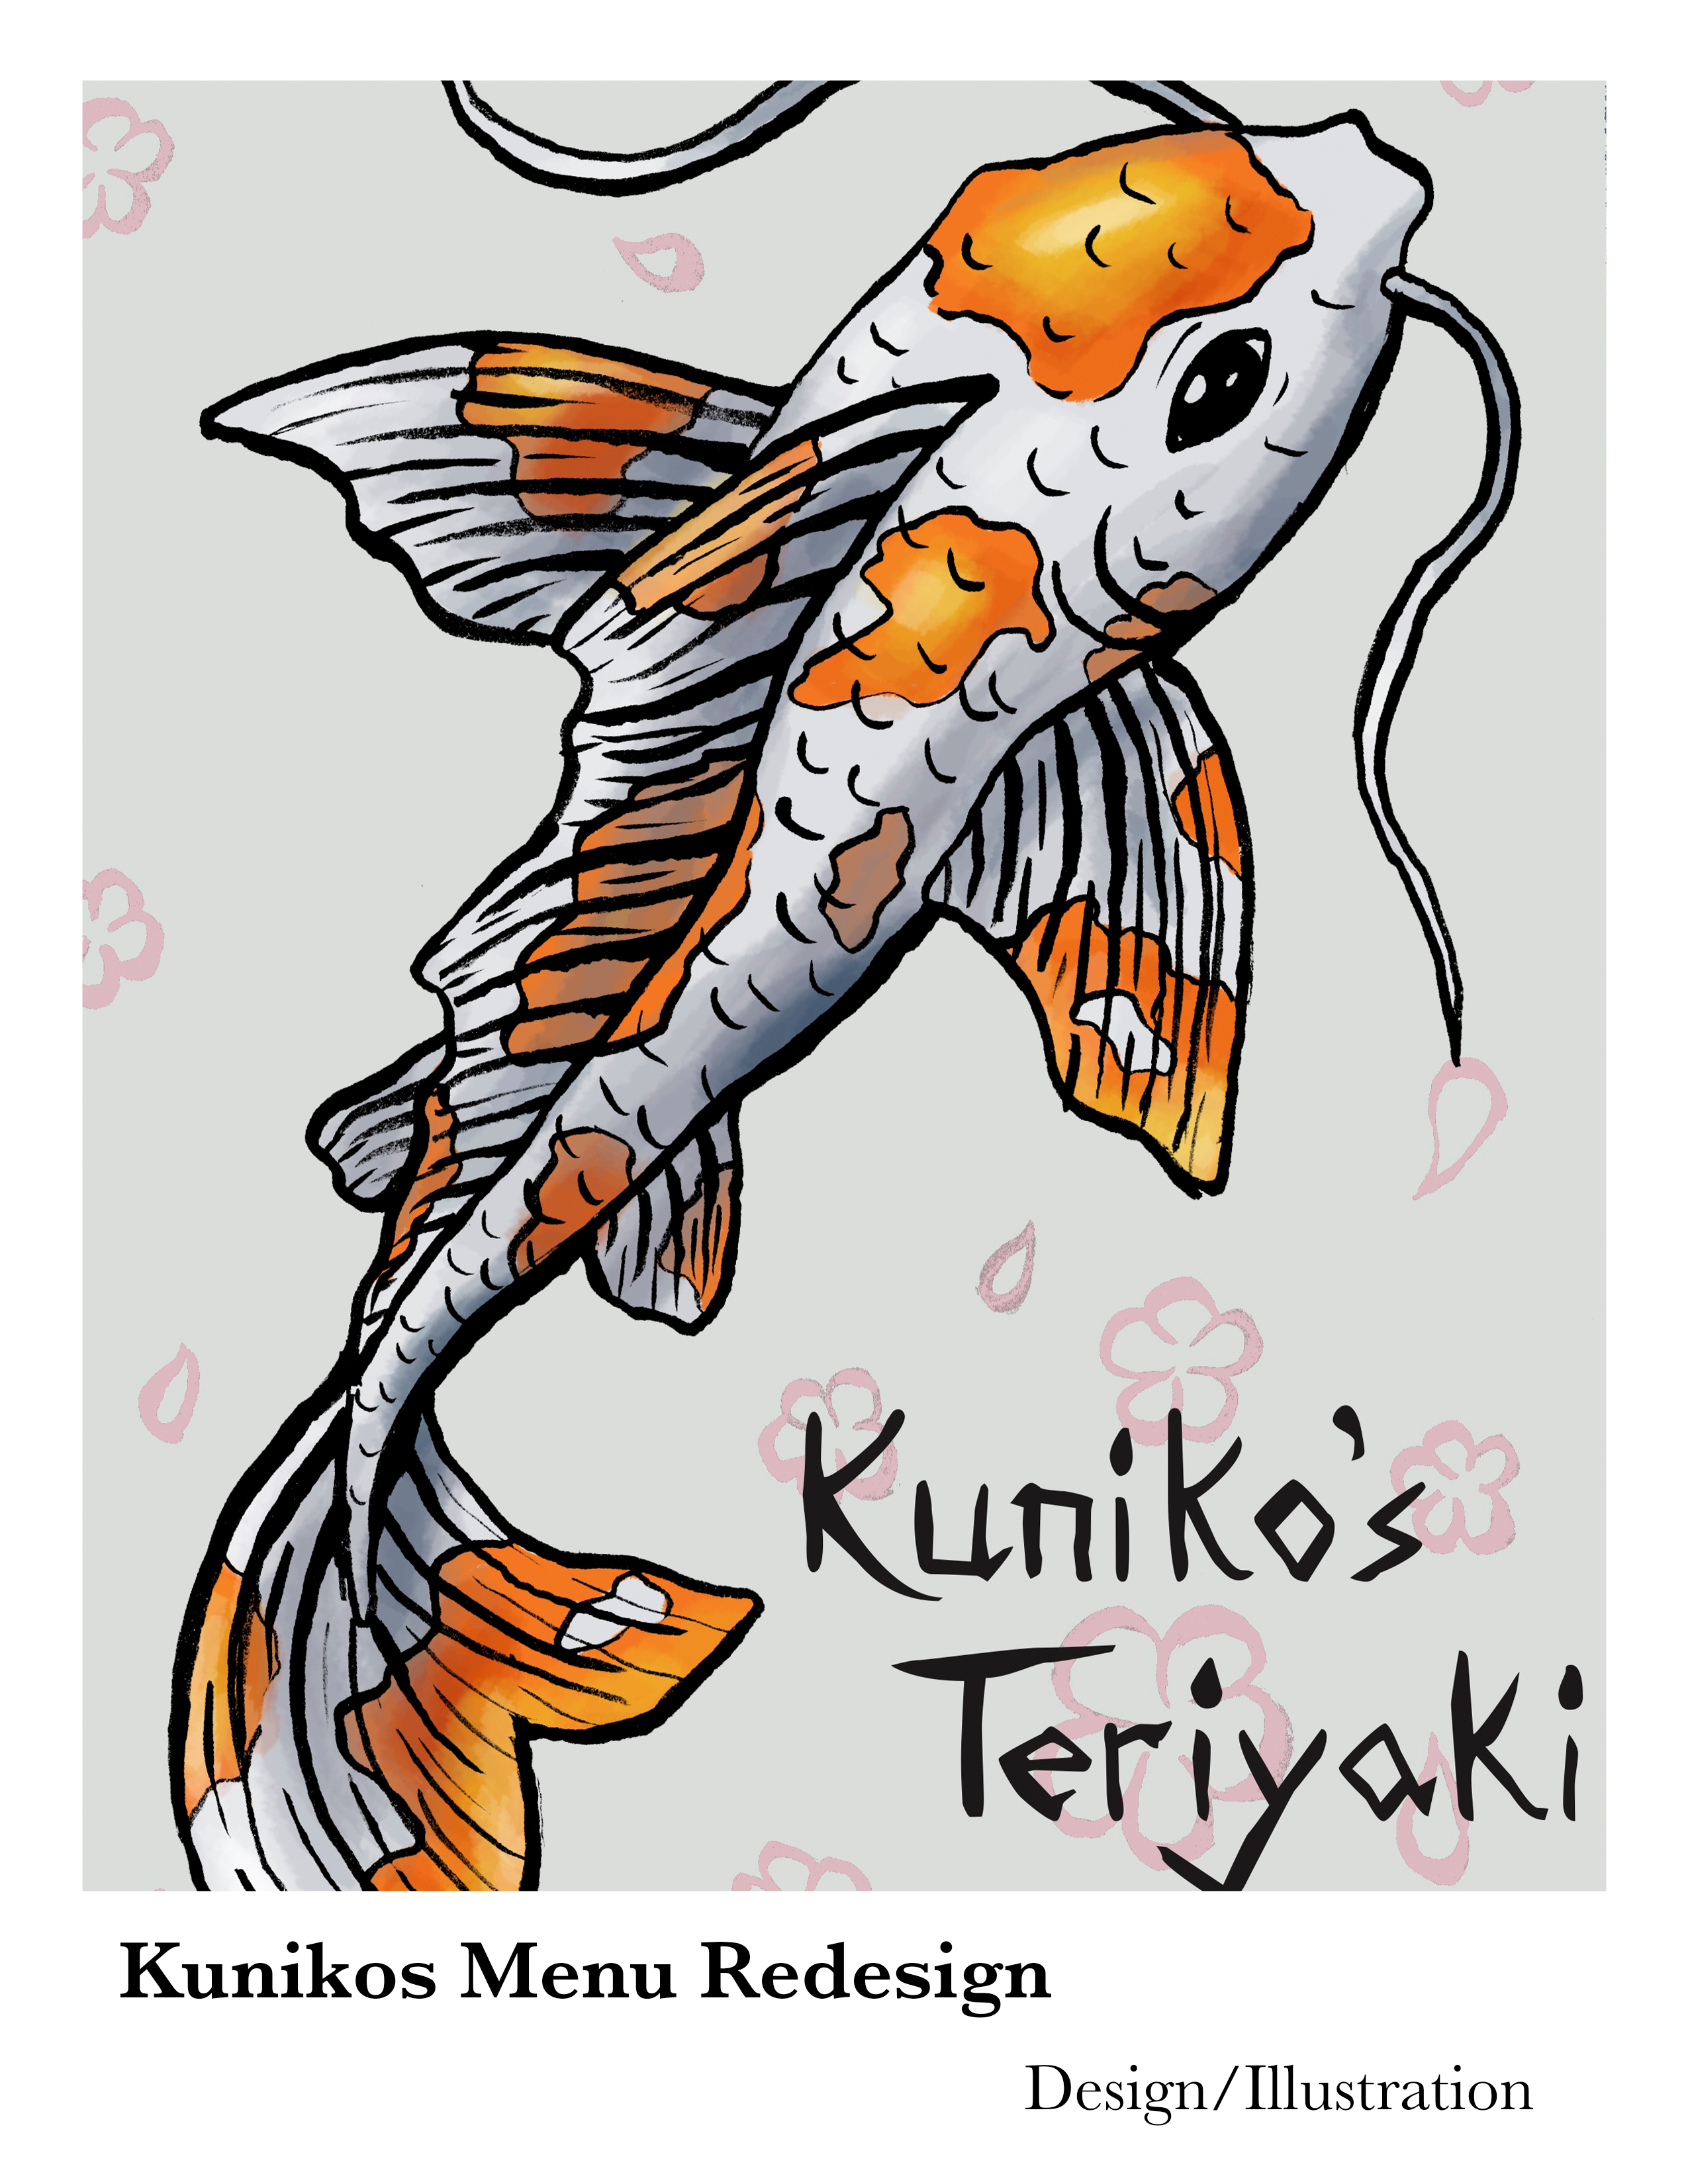 Redesigning the menu for local restaurant Kuniko's Teriyaki with unique illustrations. 